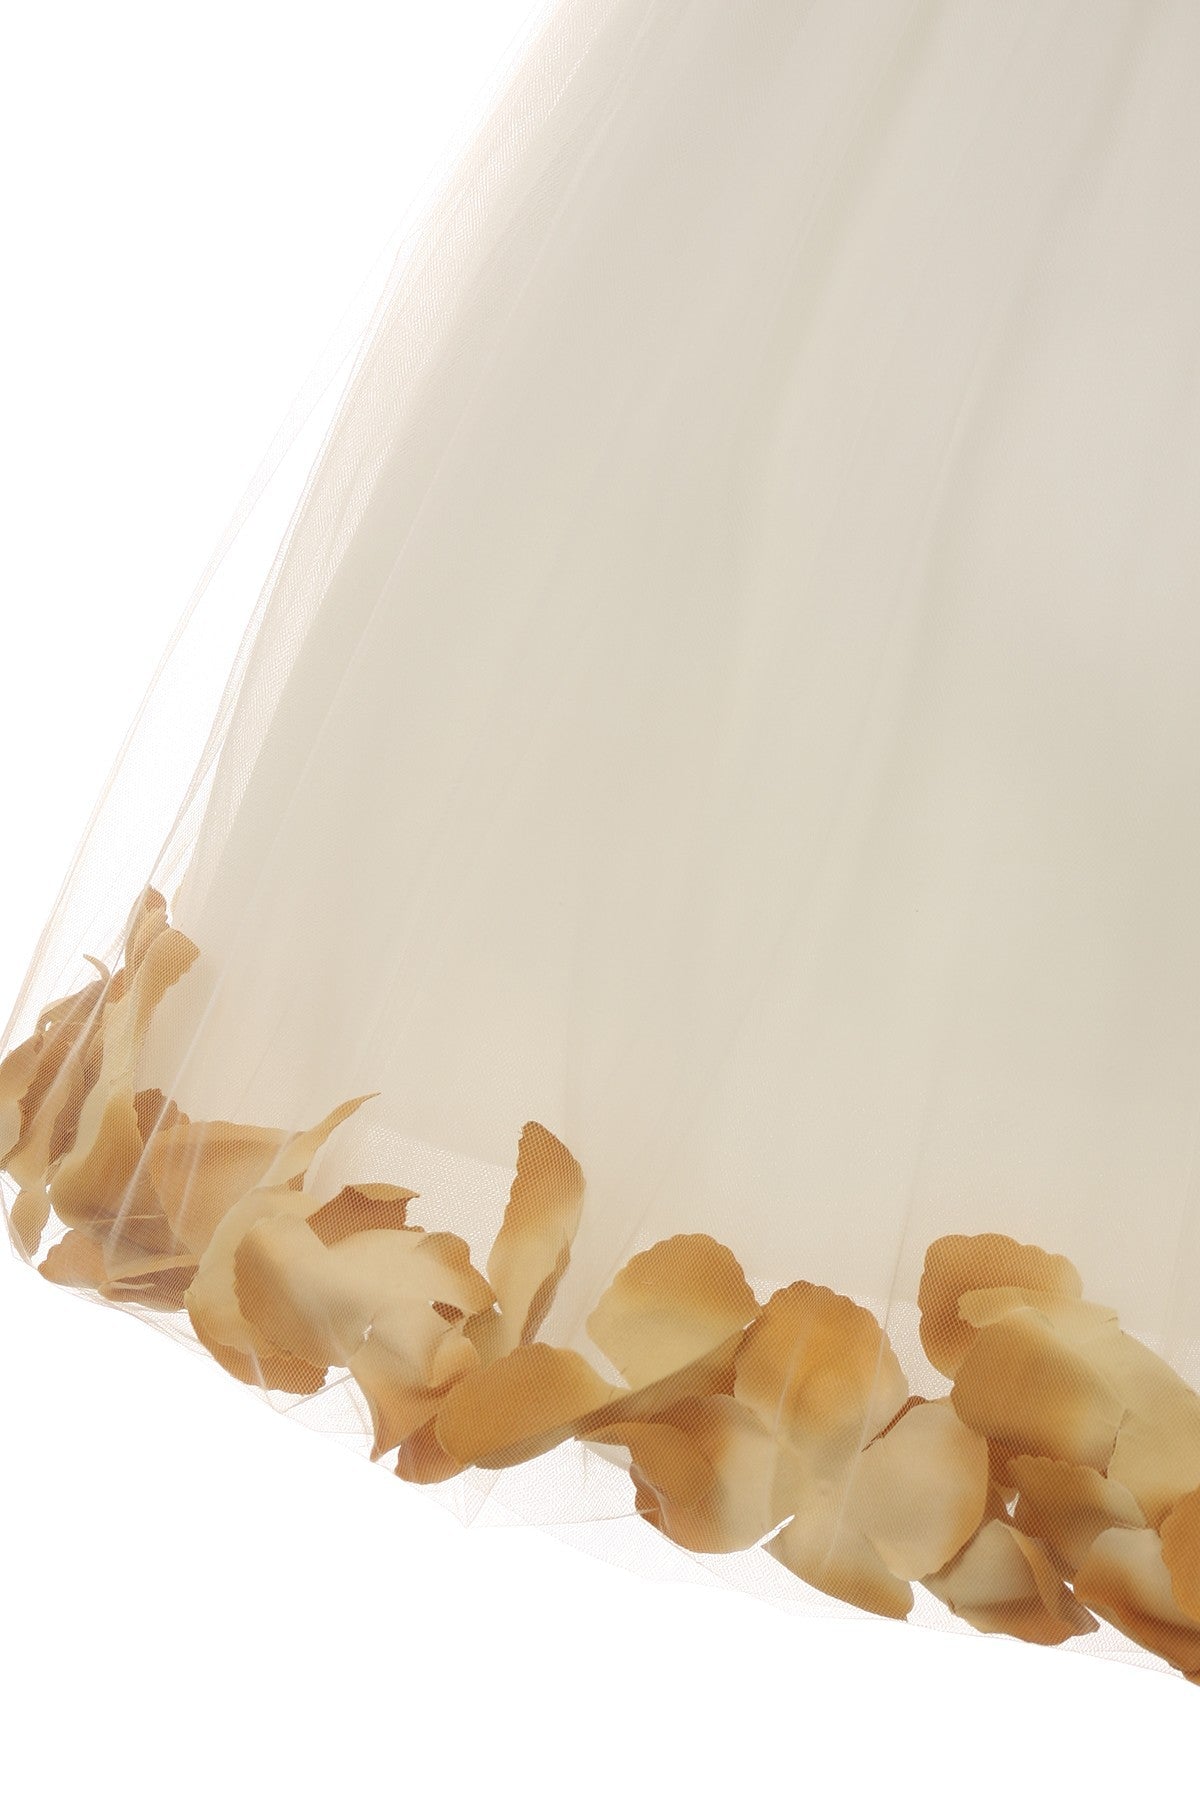 Ivory Satin Flower Petal Girls Dress with Organza Sash and Plus Sizes